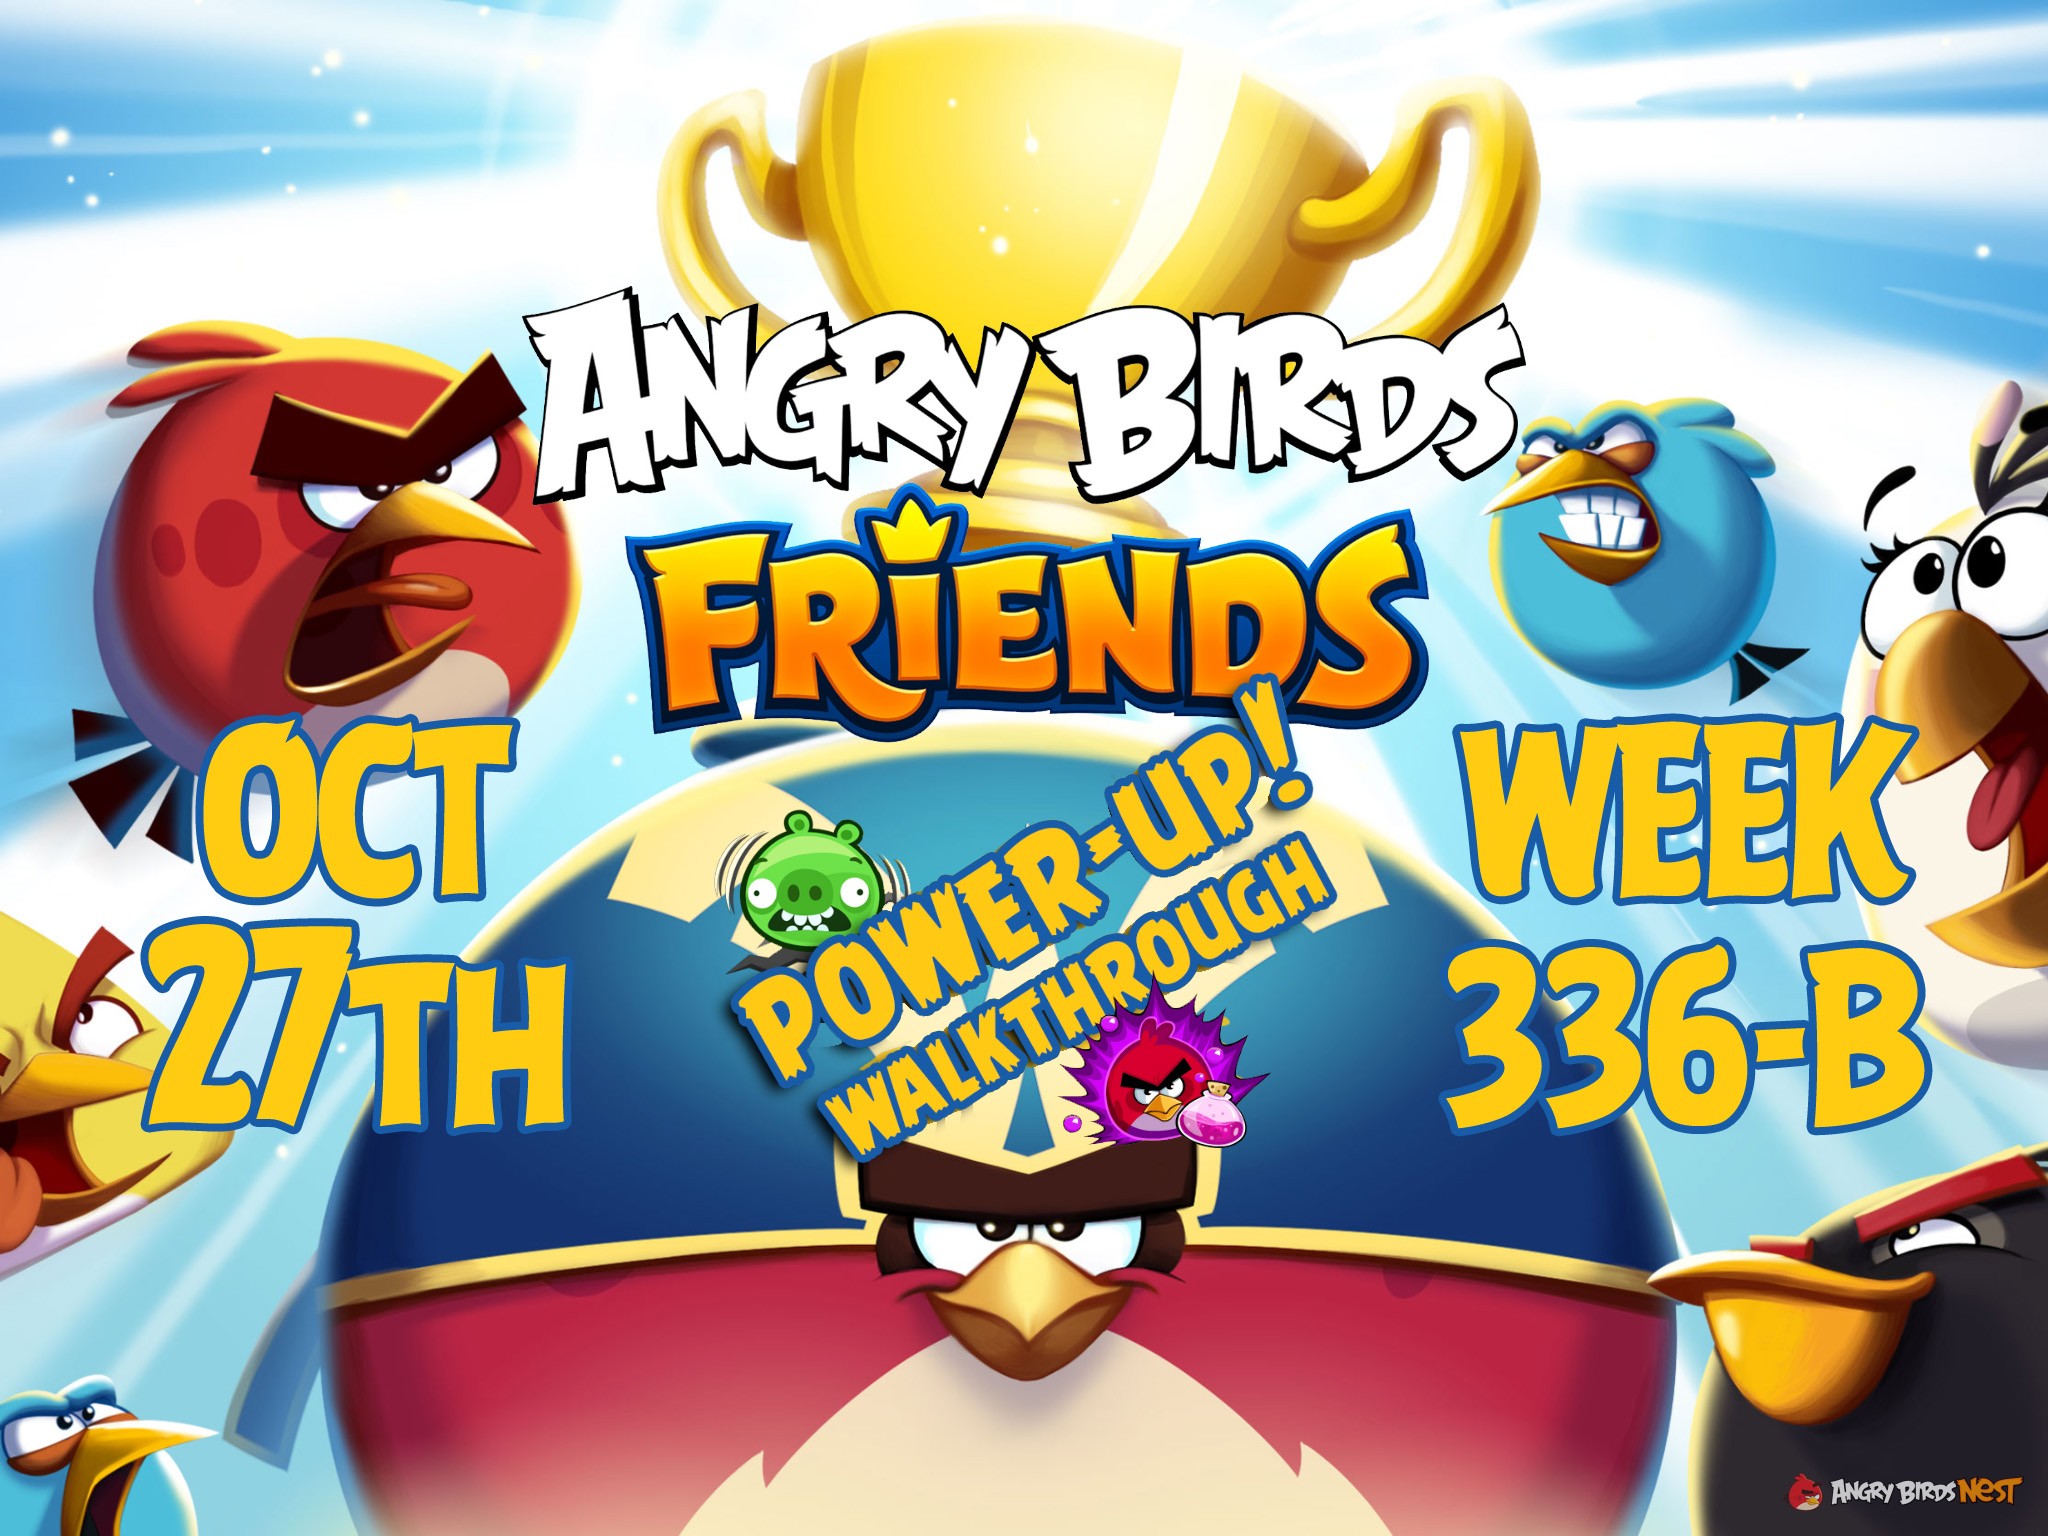 Angry-Birds-Friends-Tournament-Week-336-B-Feature-Image-PU